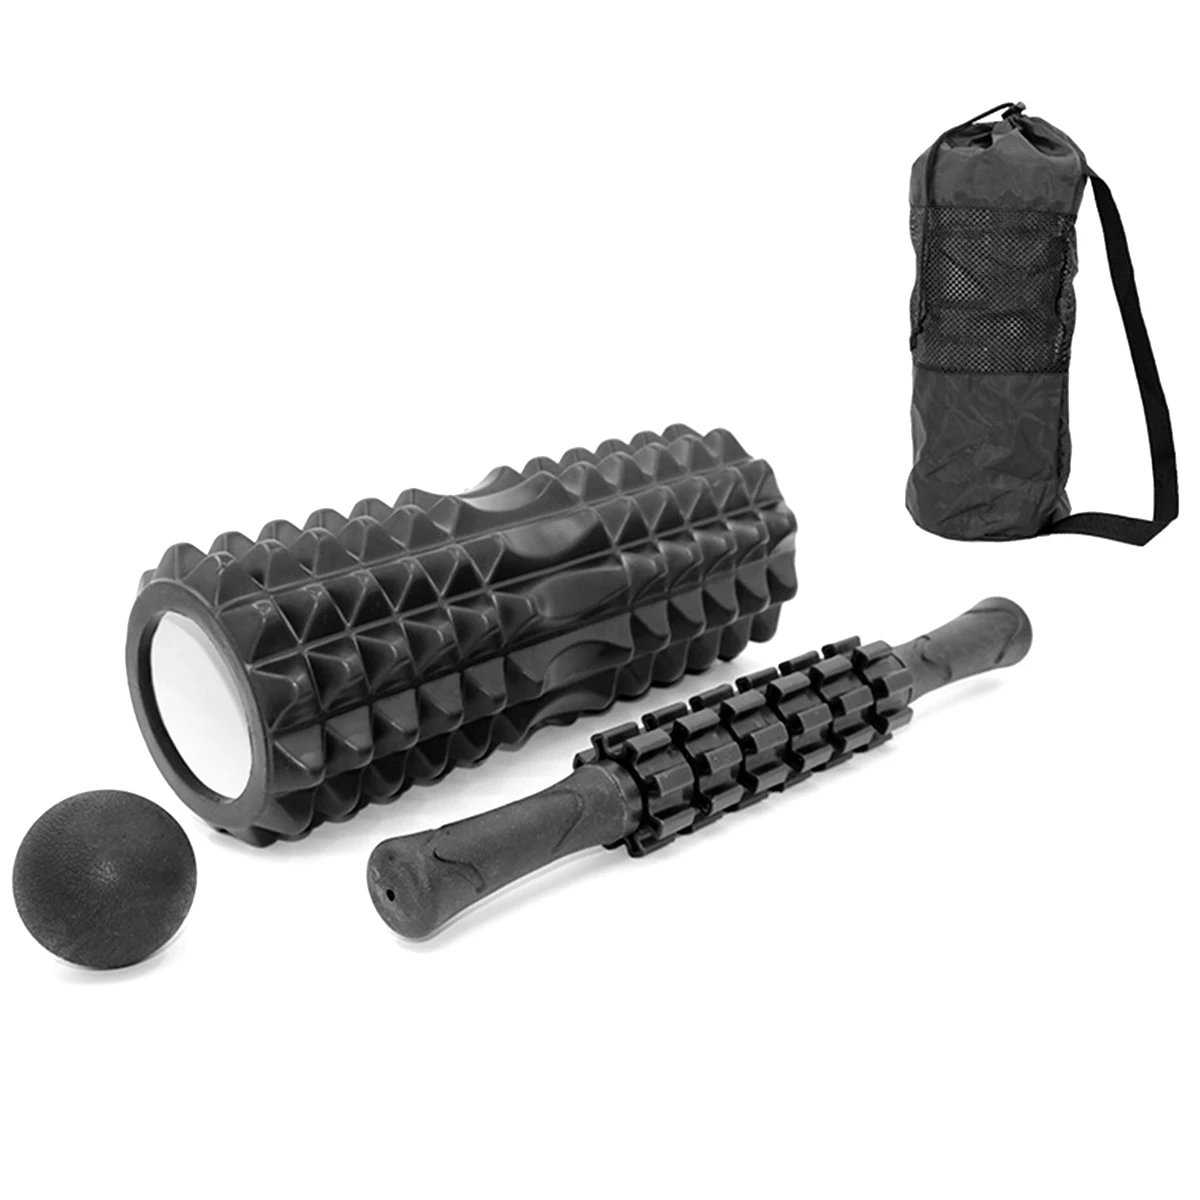 

4-in-1 Yoga Roller Set Massage Roller + Muscle Roller Stick + Lacrosse Ball with Carry Bag for Massage Fitness Yoga Pilates